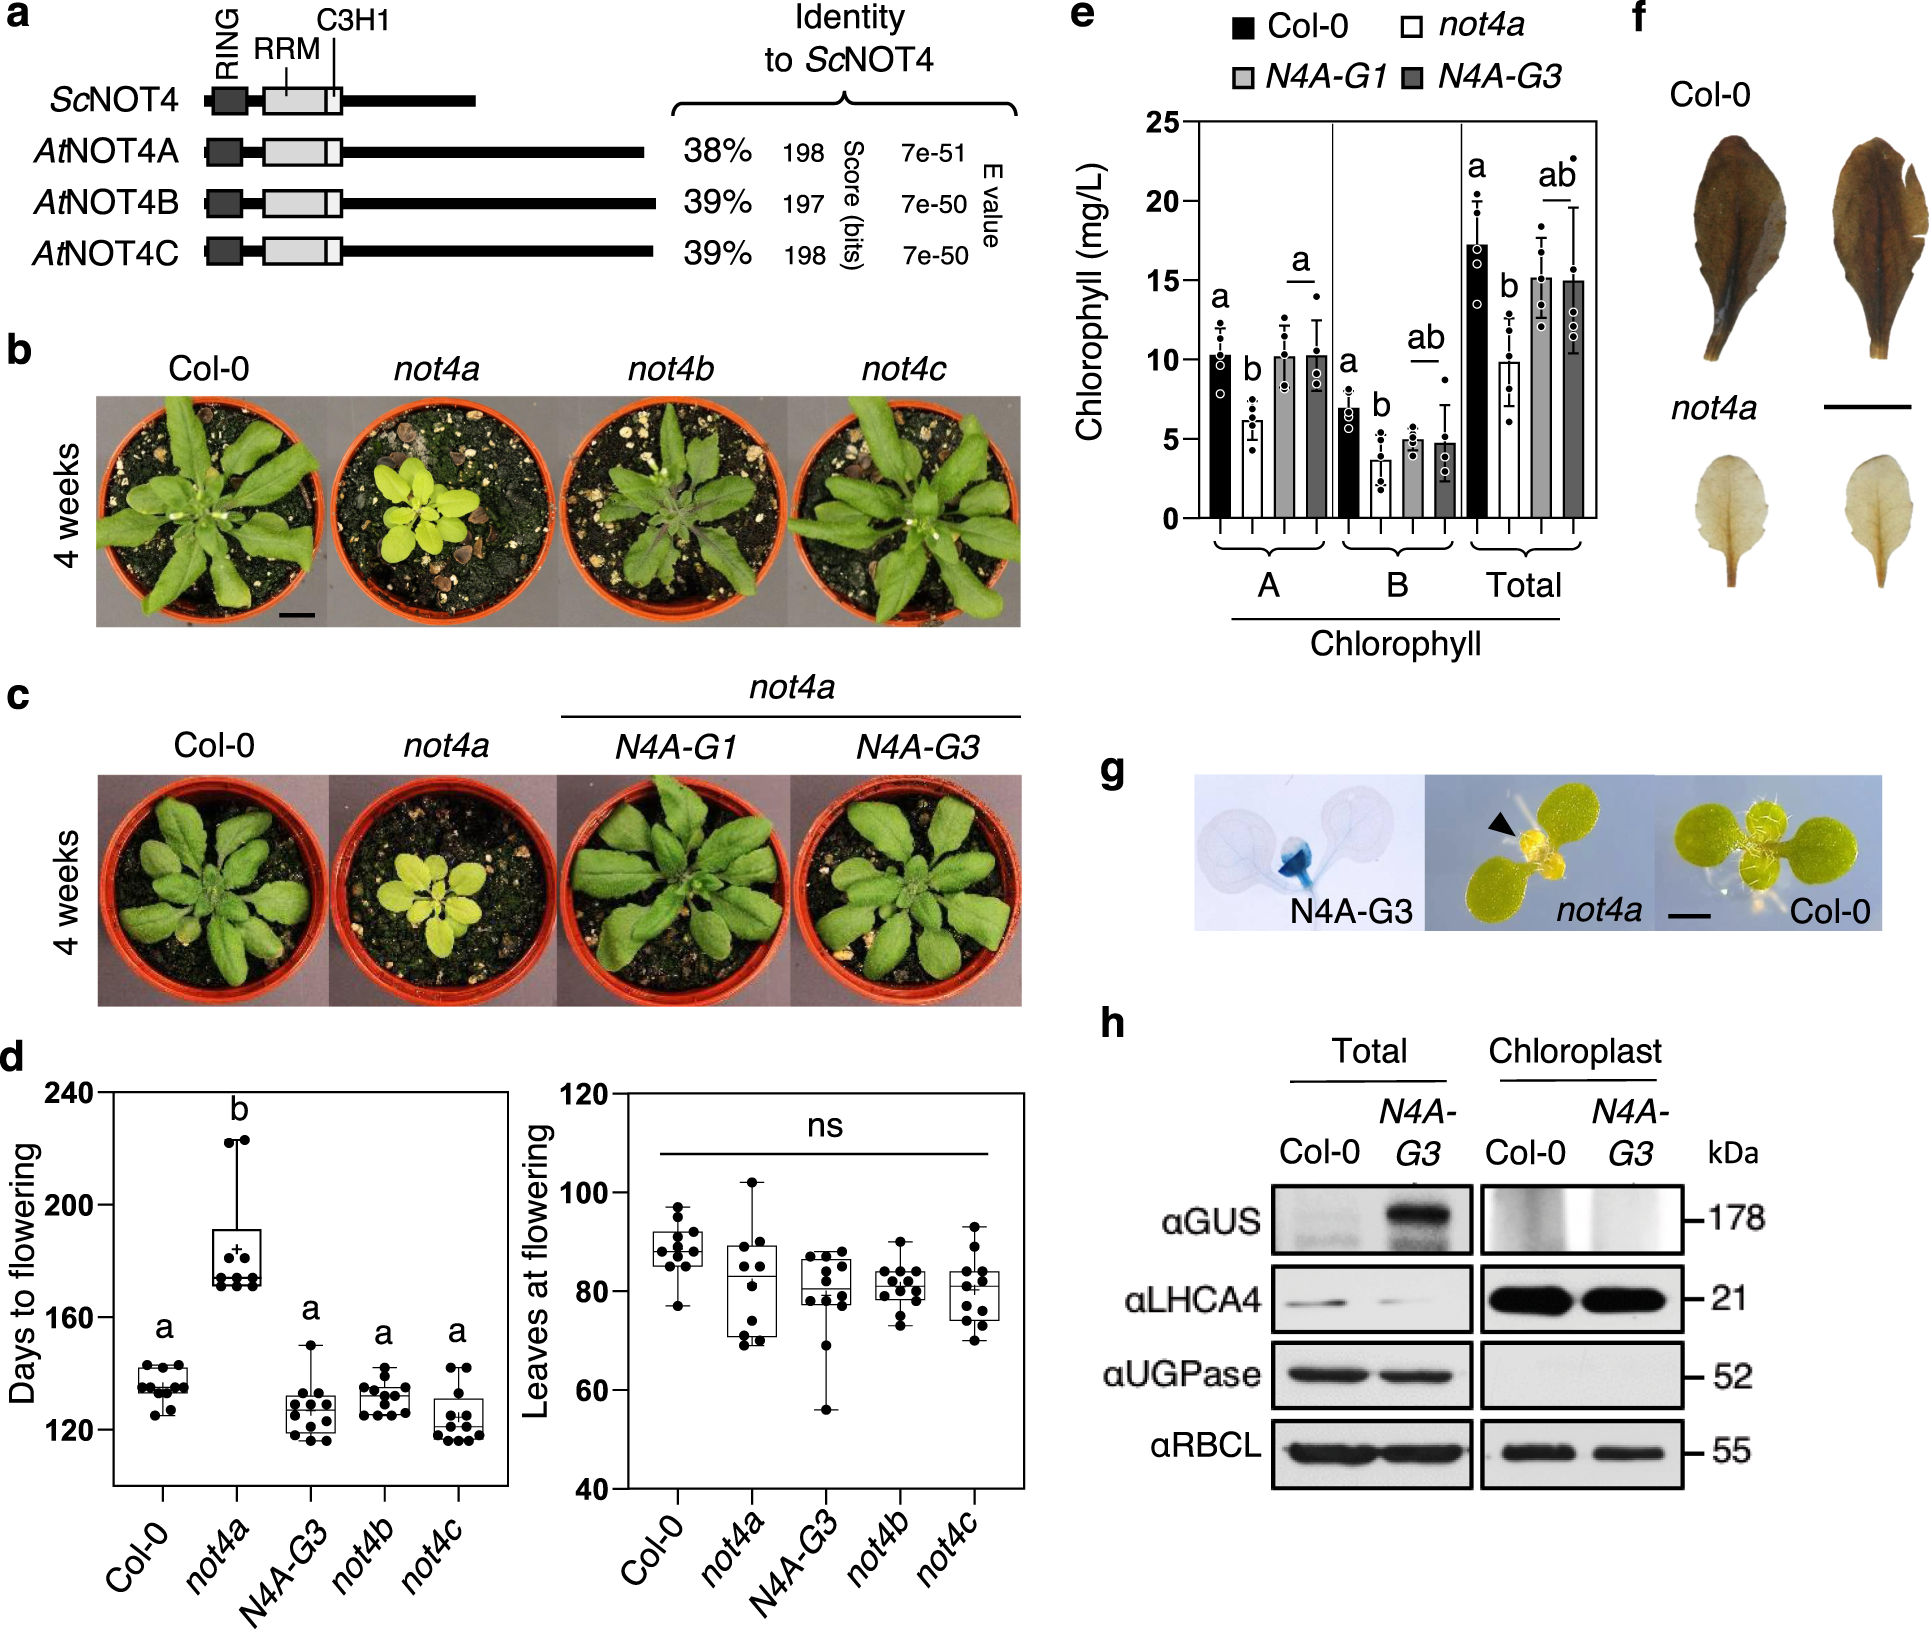 RETRACTED ARTICLE:The Arabidopsis NOT4A E3 ligase promotes PGR3 expression  and regulates chloroplast translation | Nature Communications